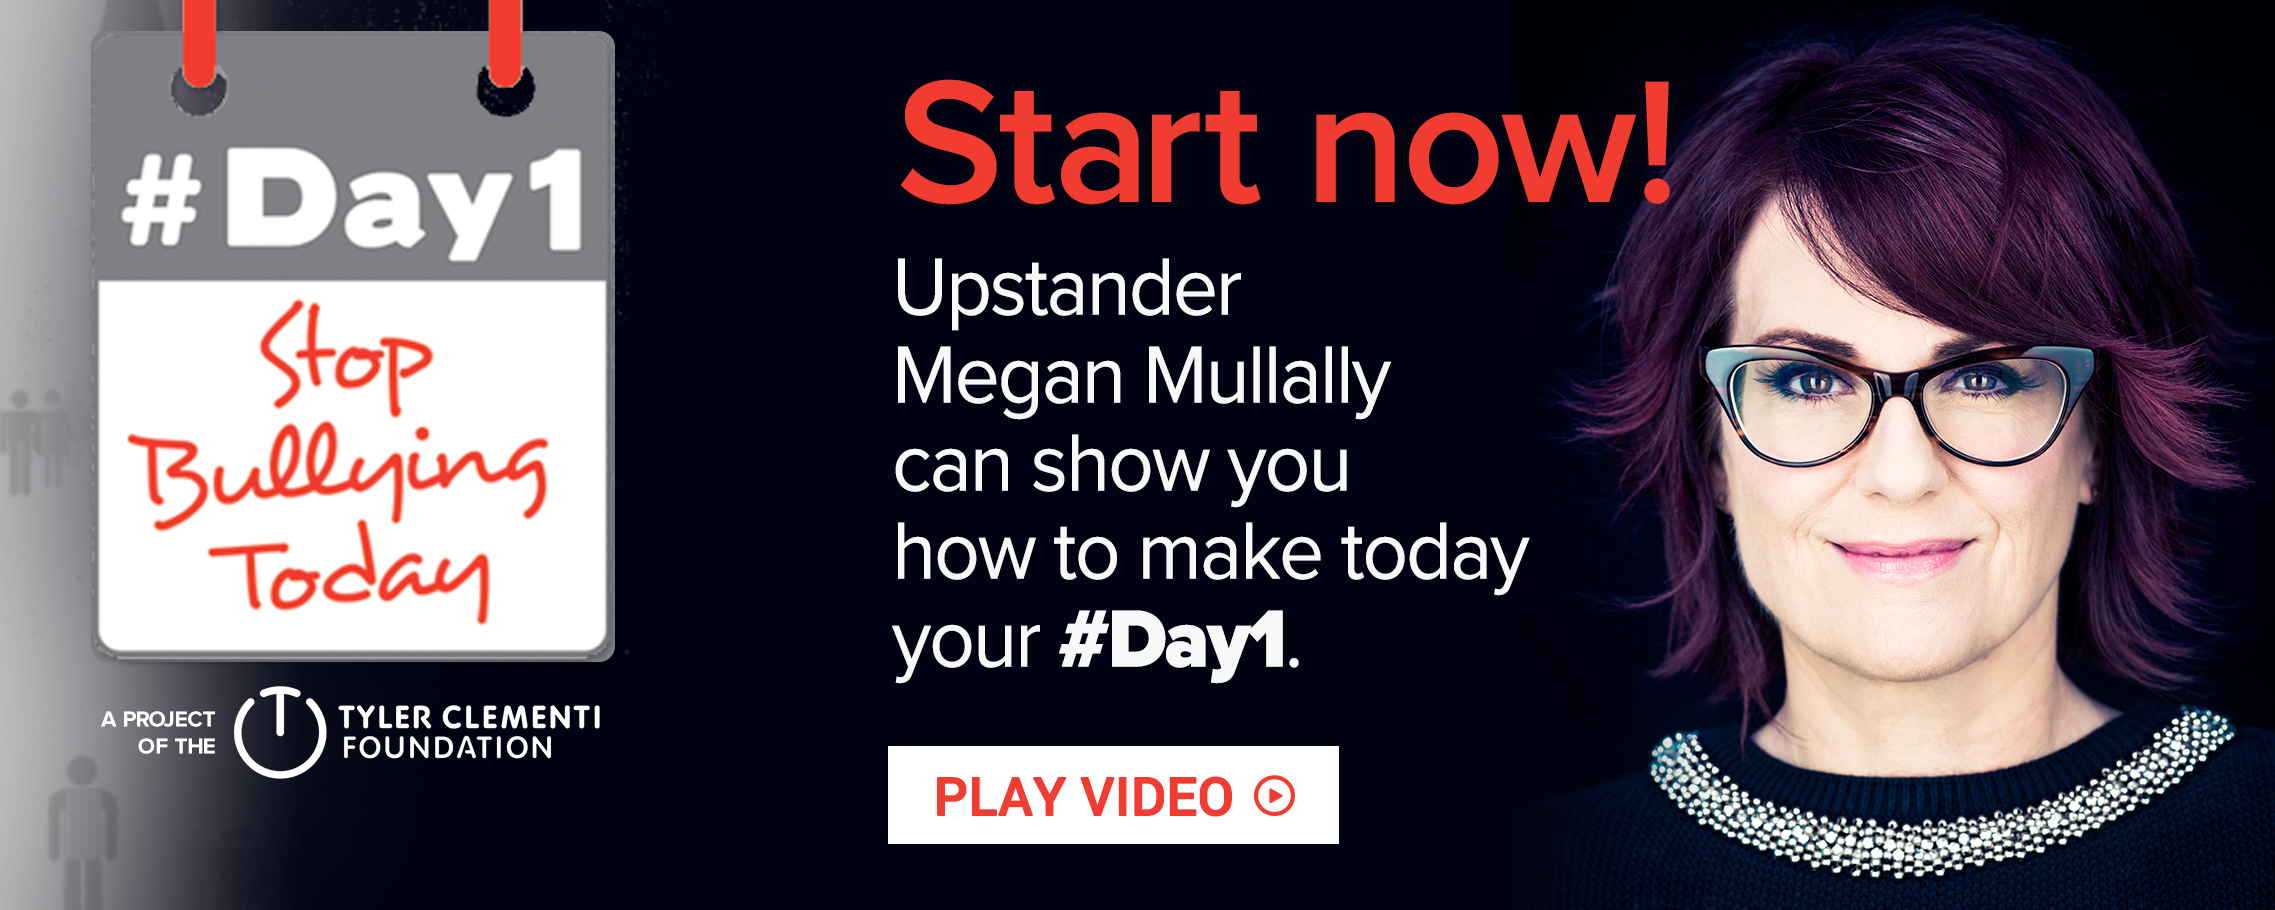 Watch Megan Mullally video about how to begin #Day1